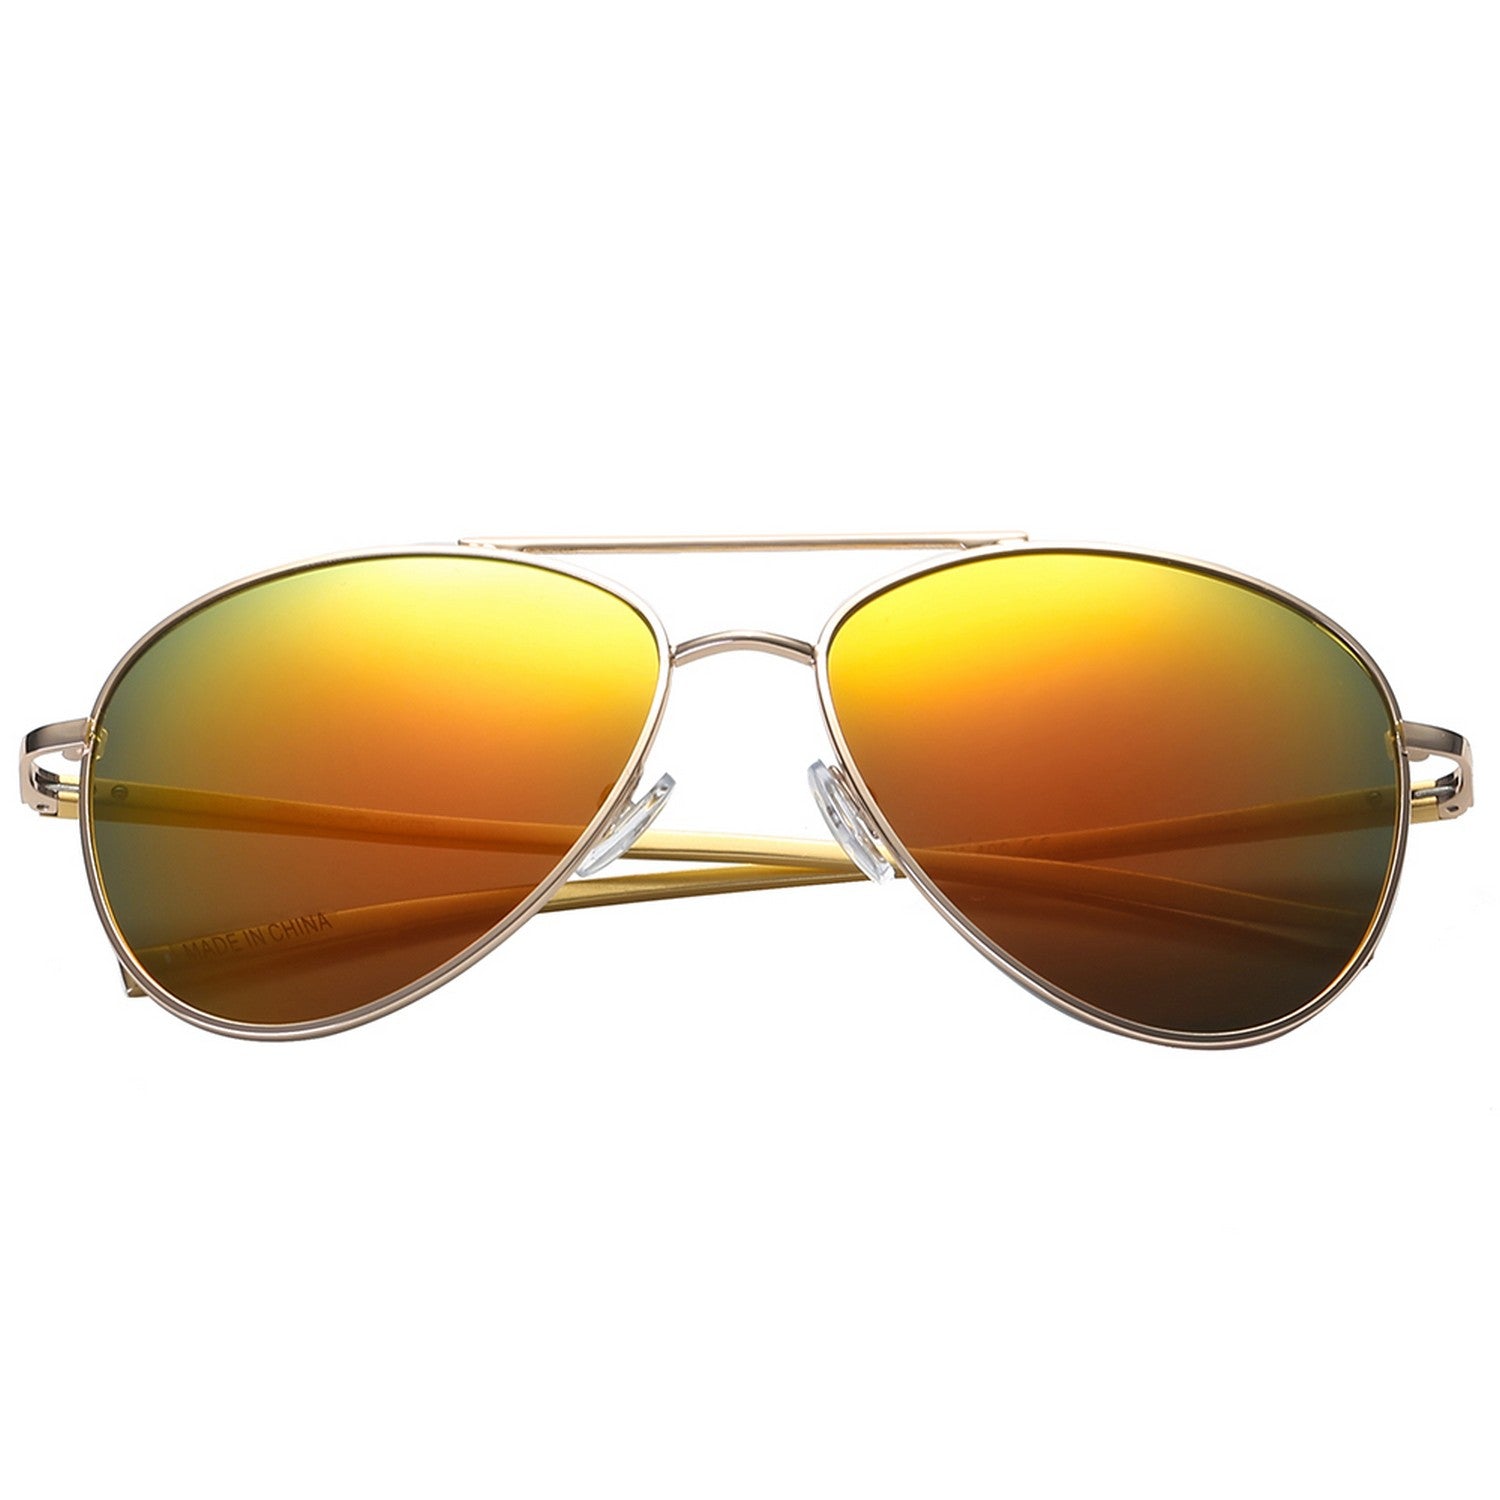 Polarspex Polarized Aviator Style Sunglasses with Aluminum Gold Frames and Polarized Lava Red Lenses for Men and Women